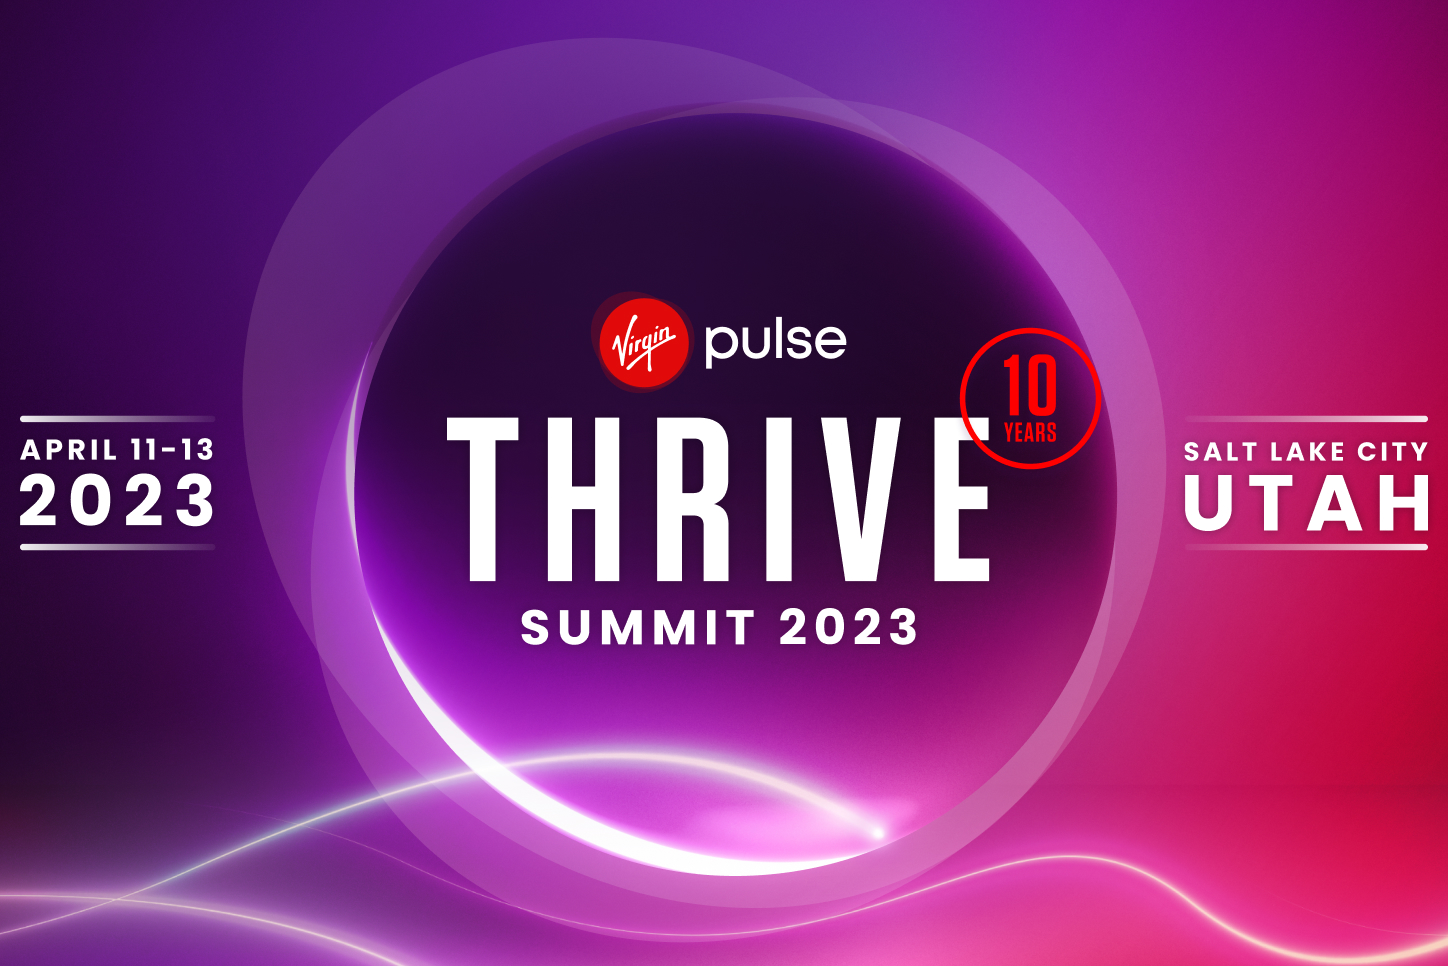 What is Thrive Summit? Personify Health Virgin Pulse